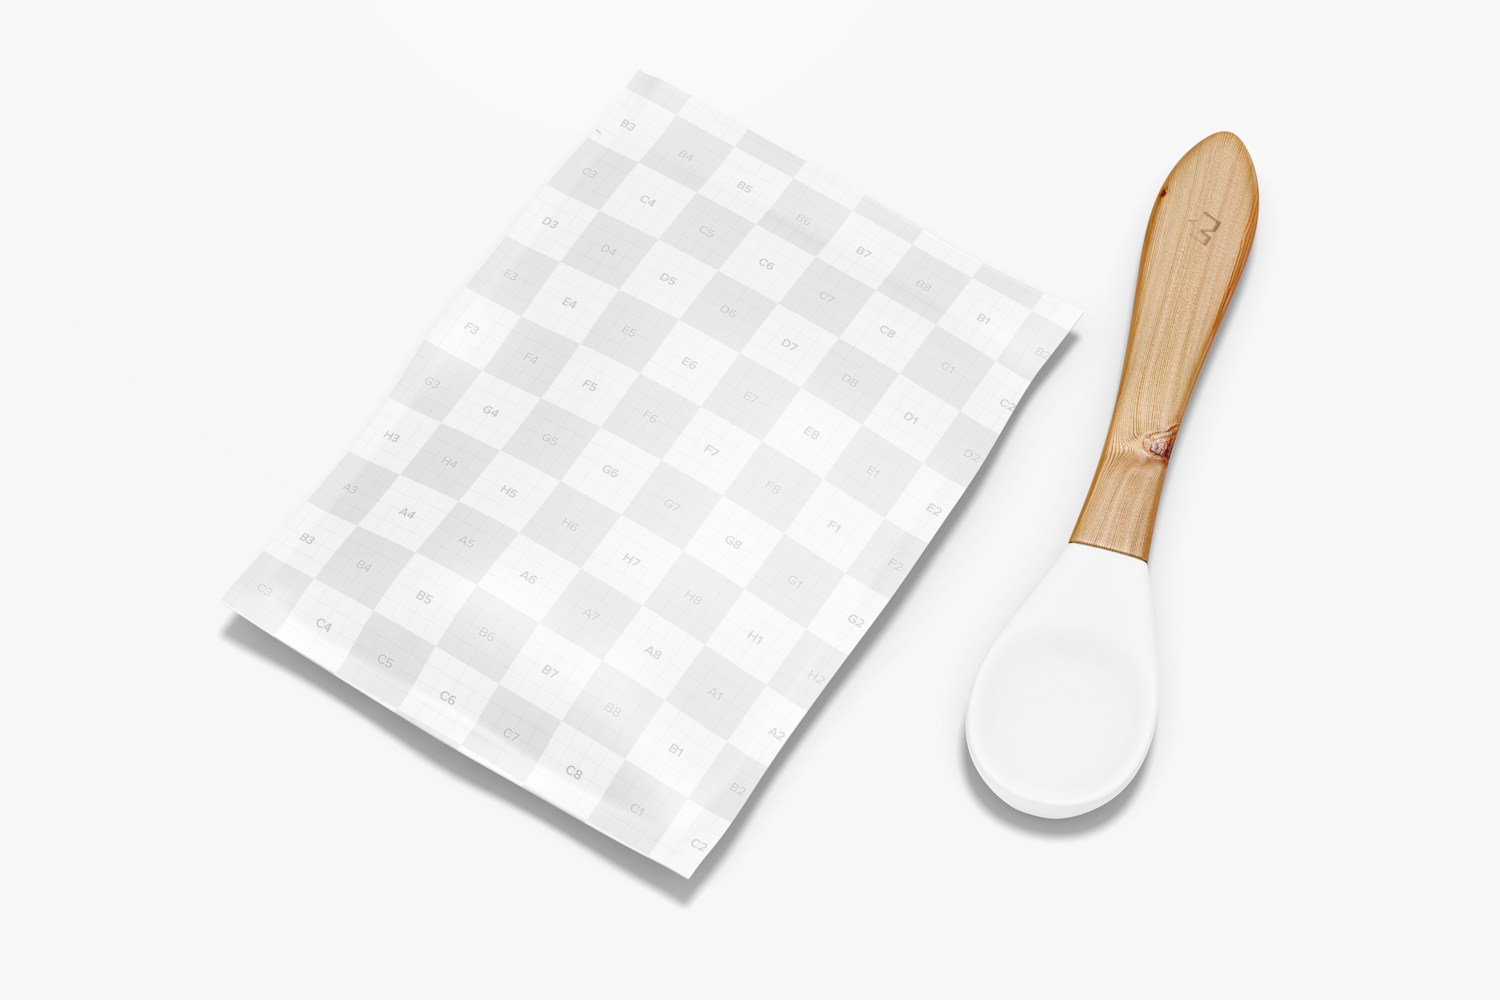 Baby Cereal Trial Pack With Spoon Mockup